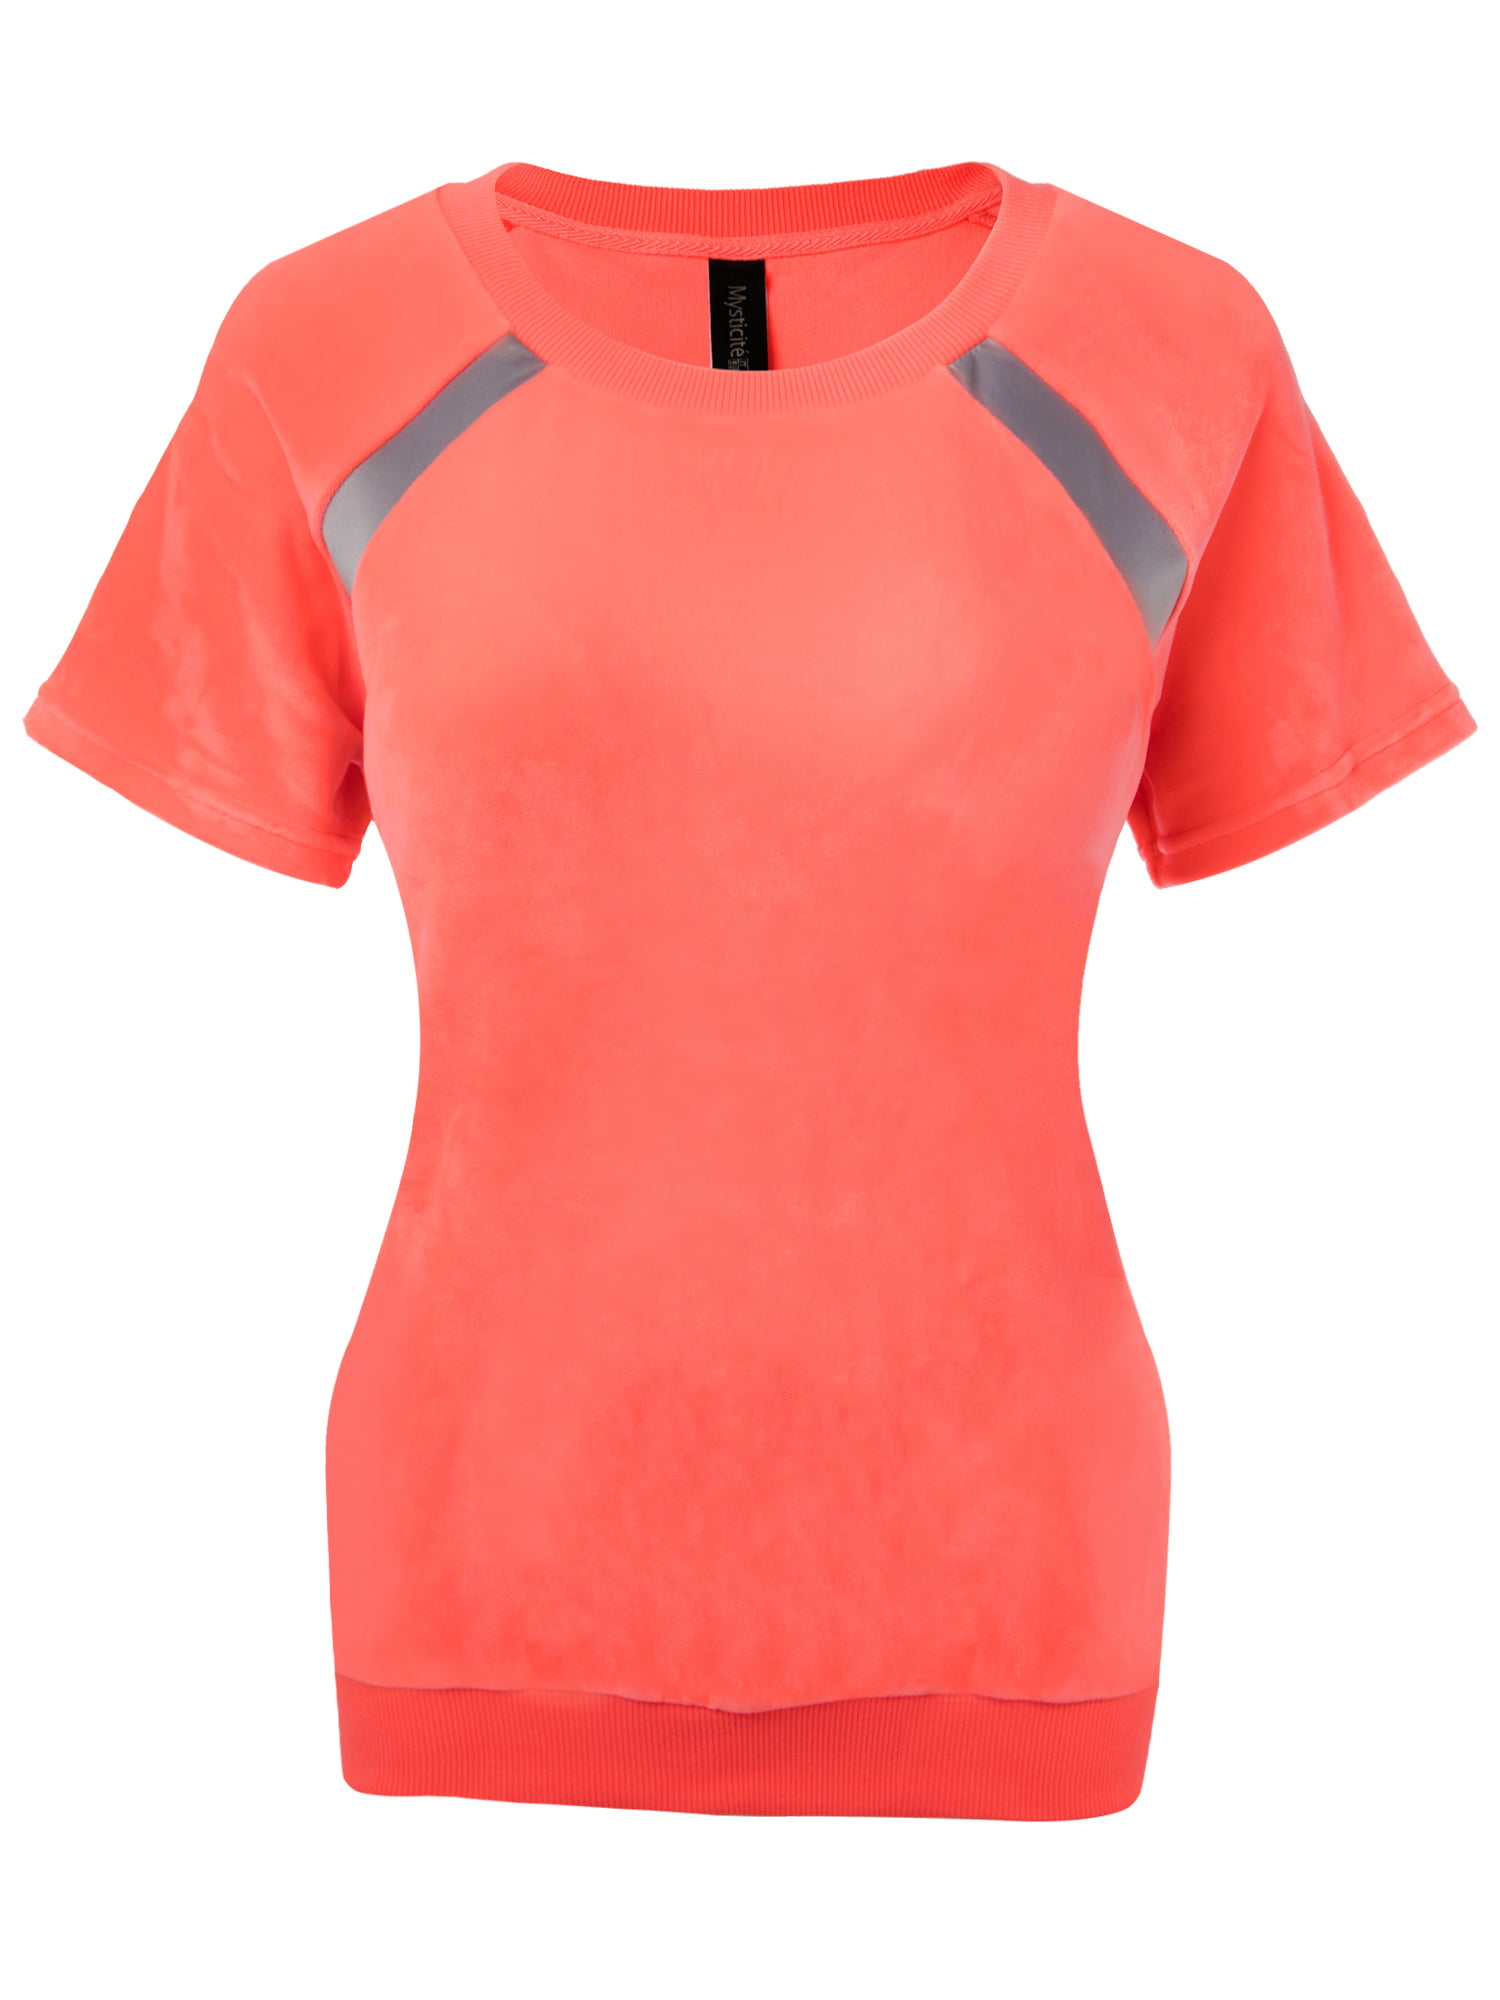 Yoga and Running Stretchy and Breathable Suitable for Fitness Gregster Women’s Functional Short Sleeve Running Top V-Neck Sports Shirt